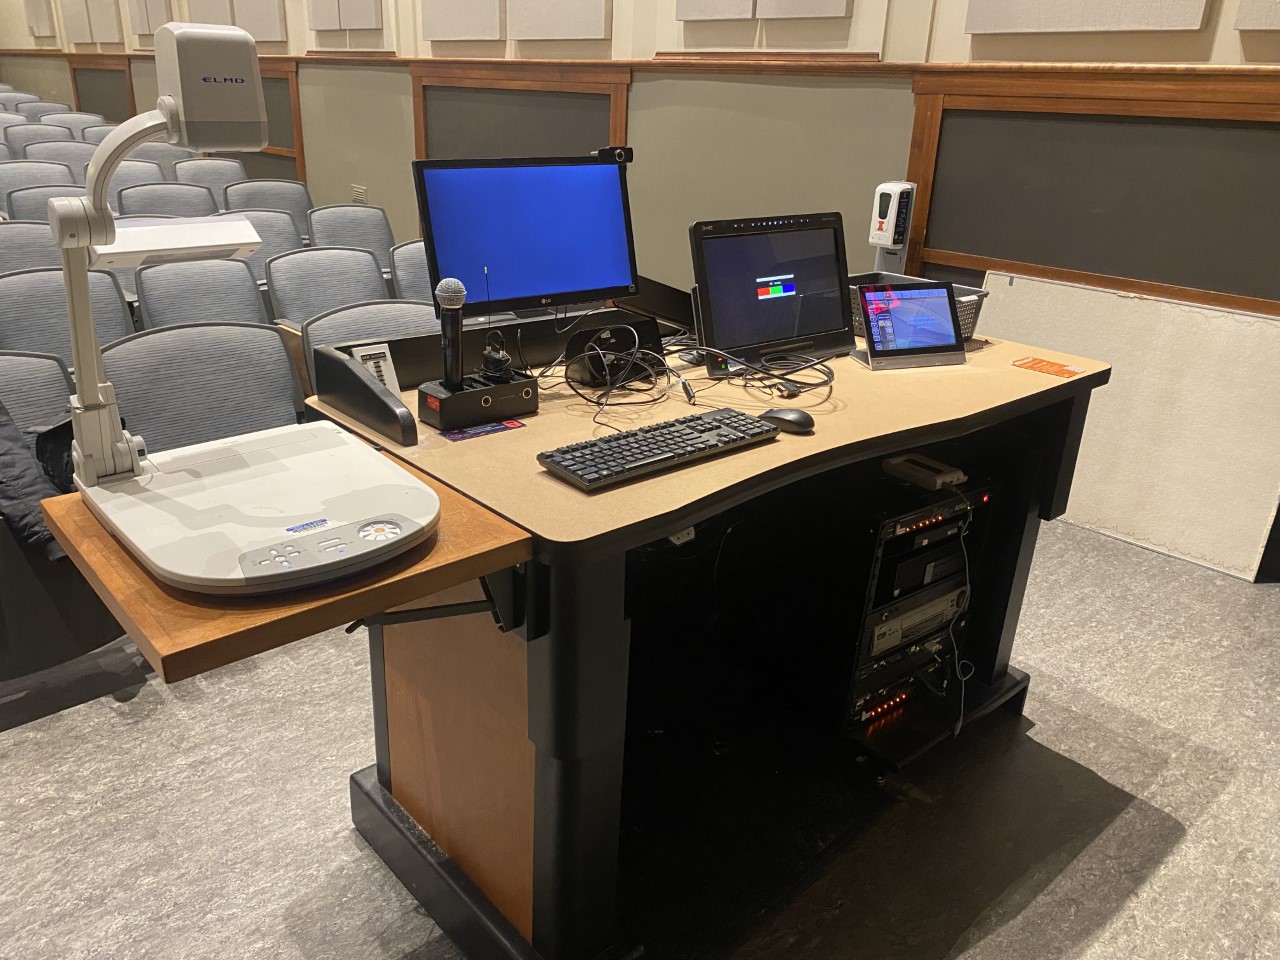 A view of the open cabinet with a computer monitor, VGA, and HDMI inputs, a touch panel controller, document camera, and audiovisual rack.